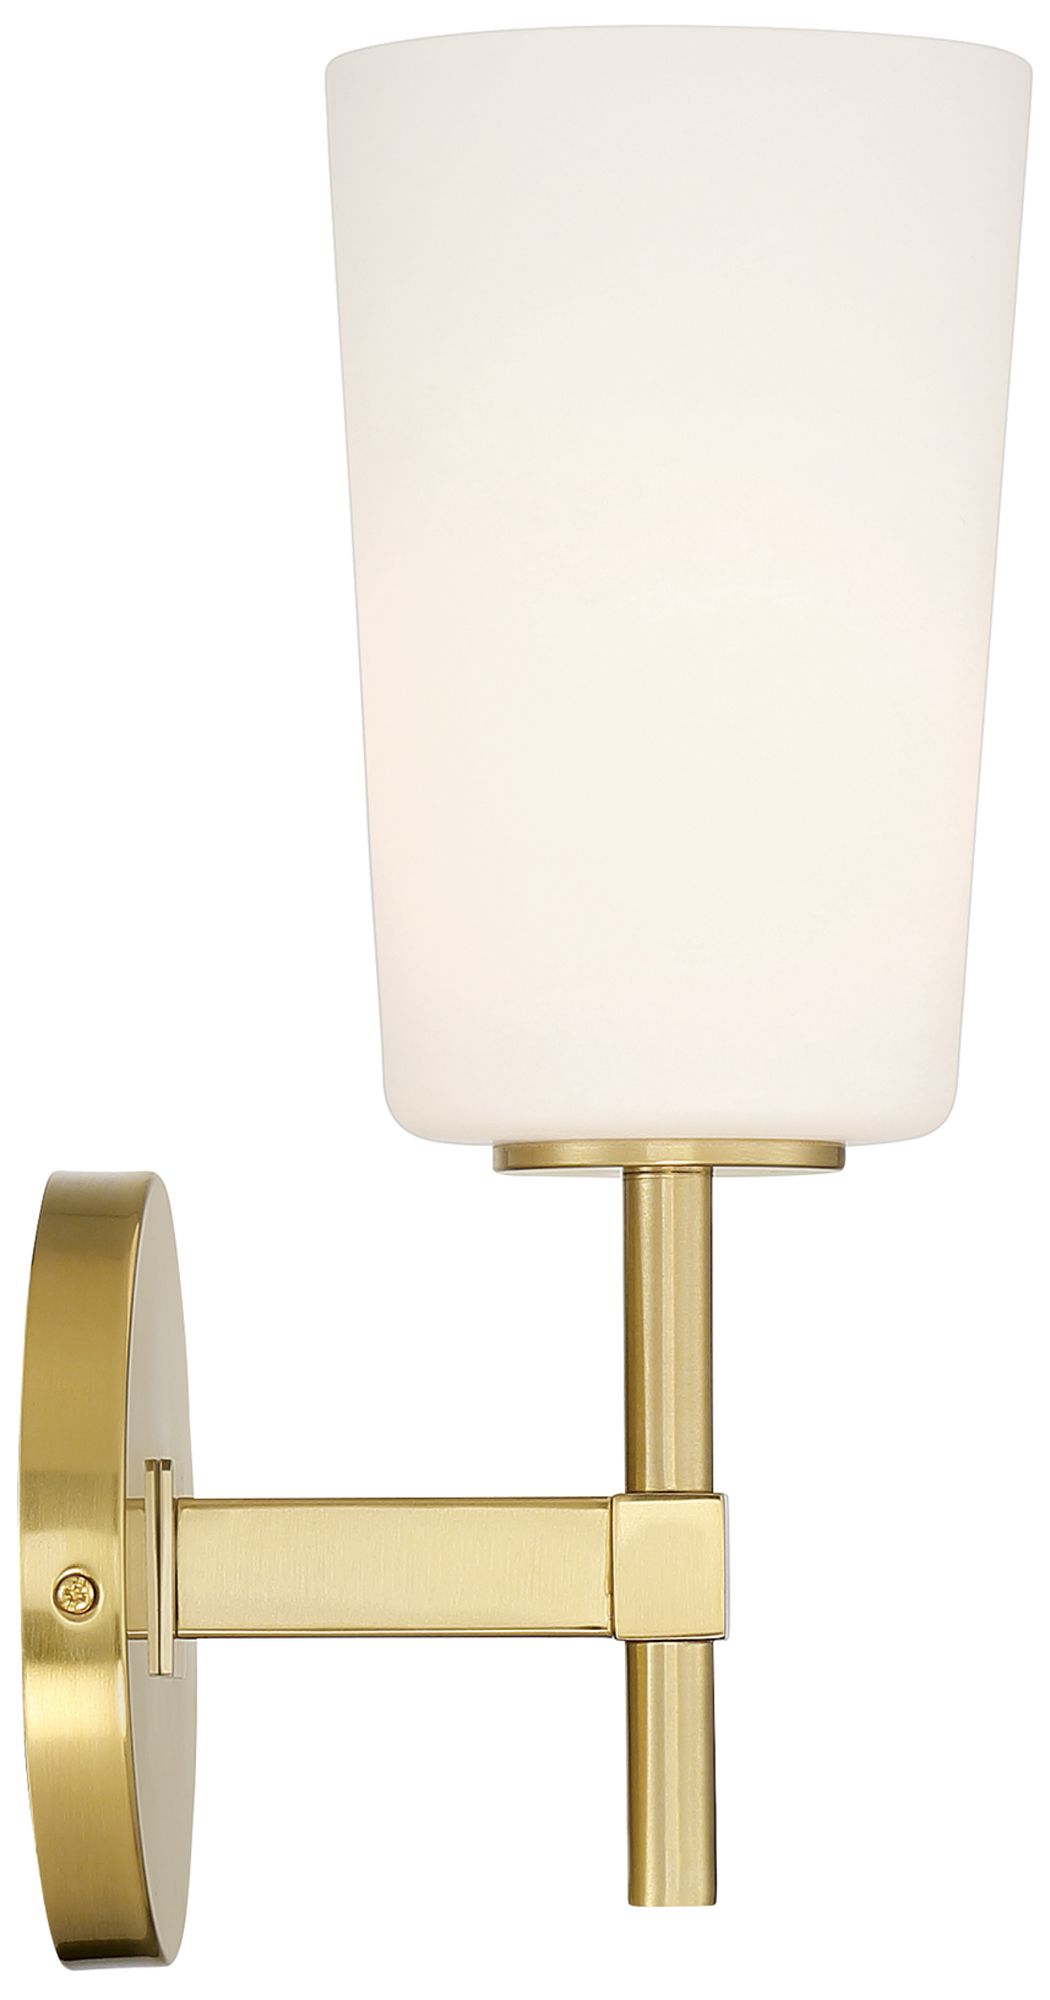 Colton 1 Light Aged Brass Wall Mount